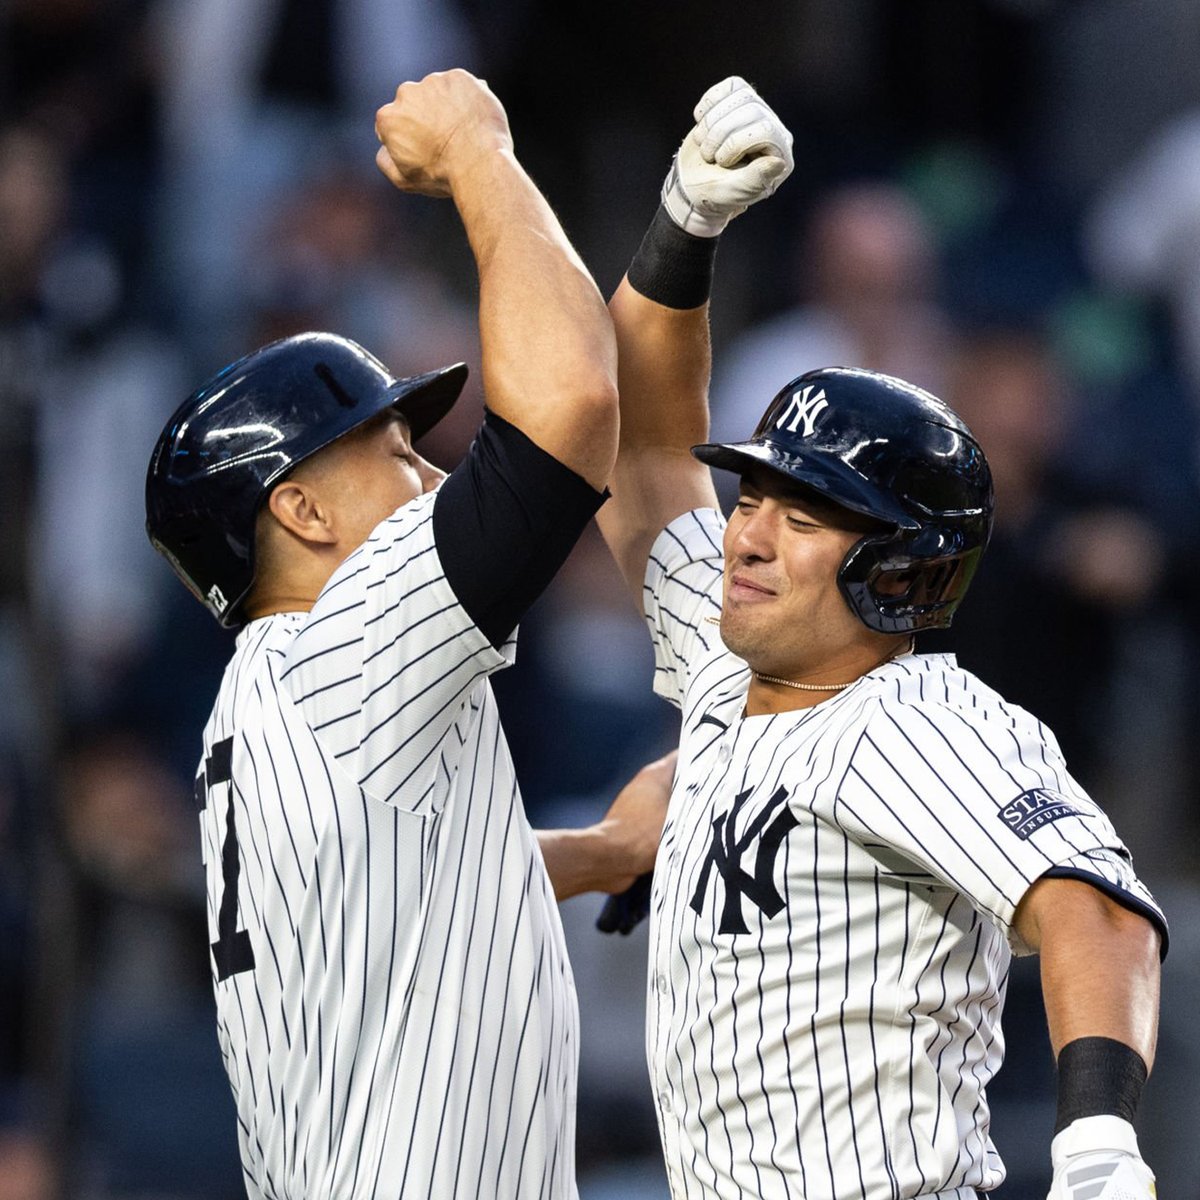 The Yankees have begun the season 10-2 for the fourth time in team history! The three other teams all went to the World Series